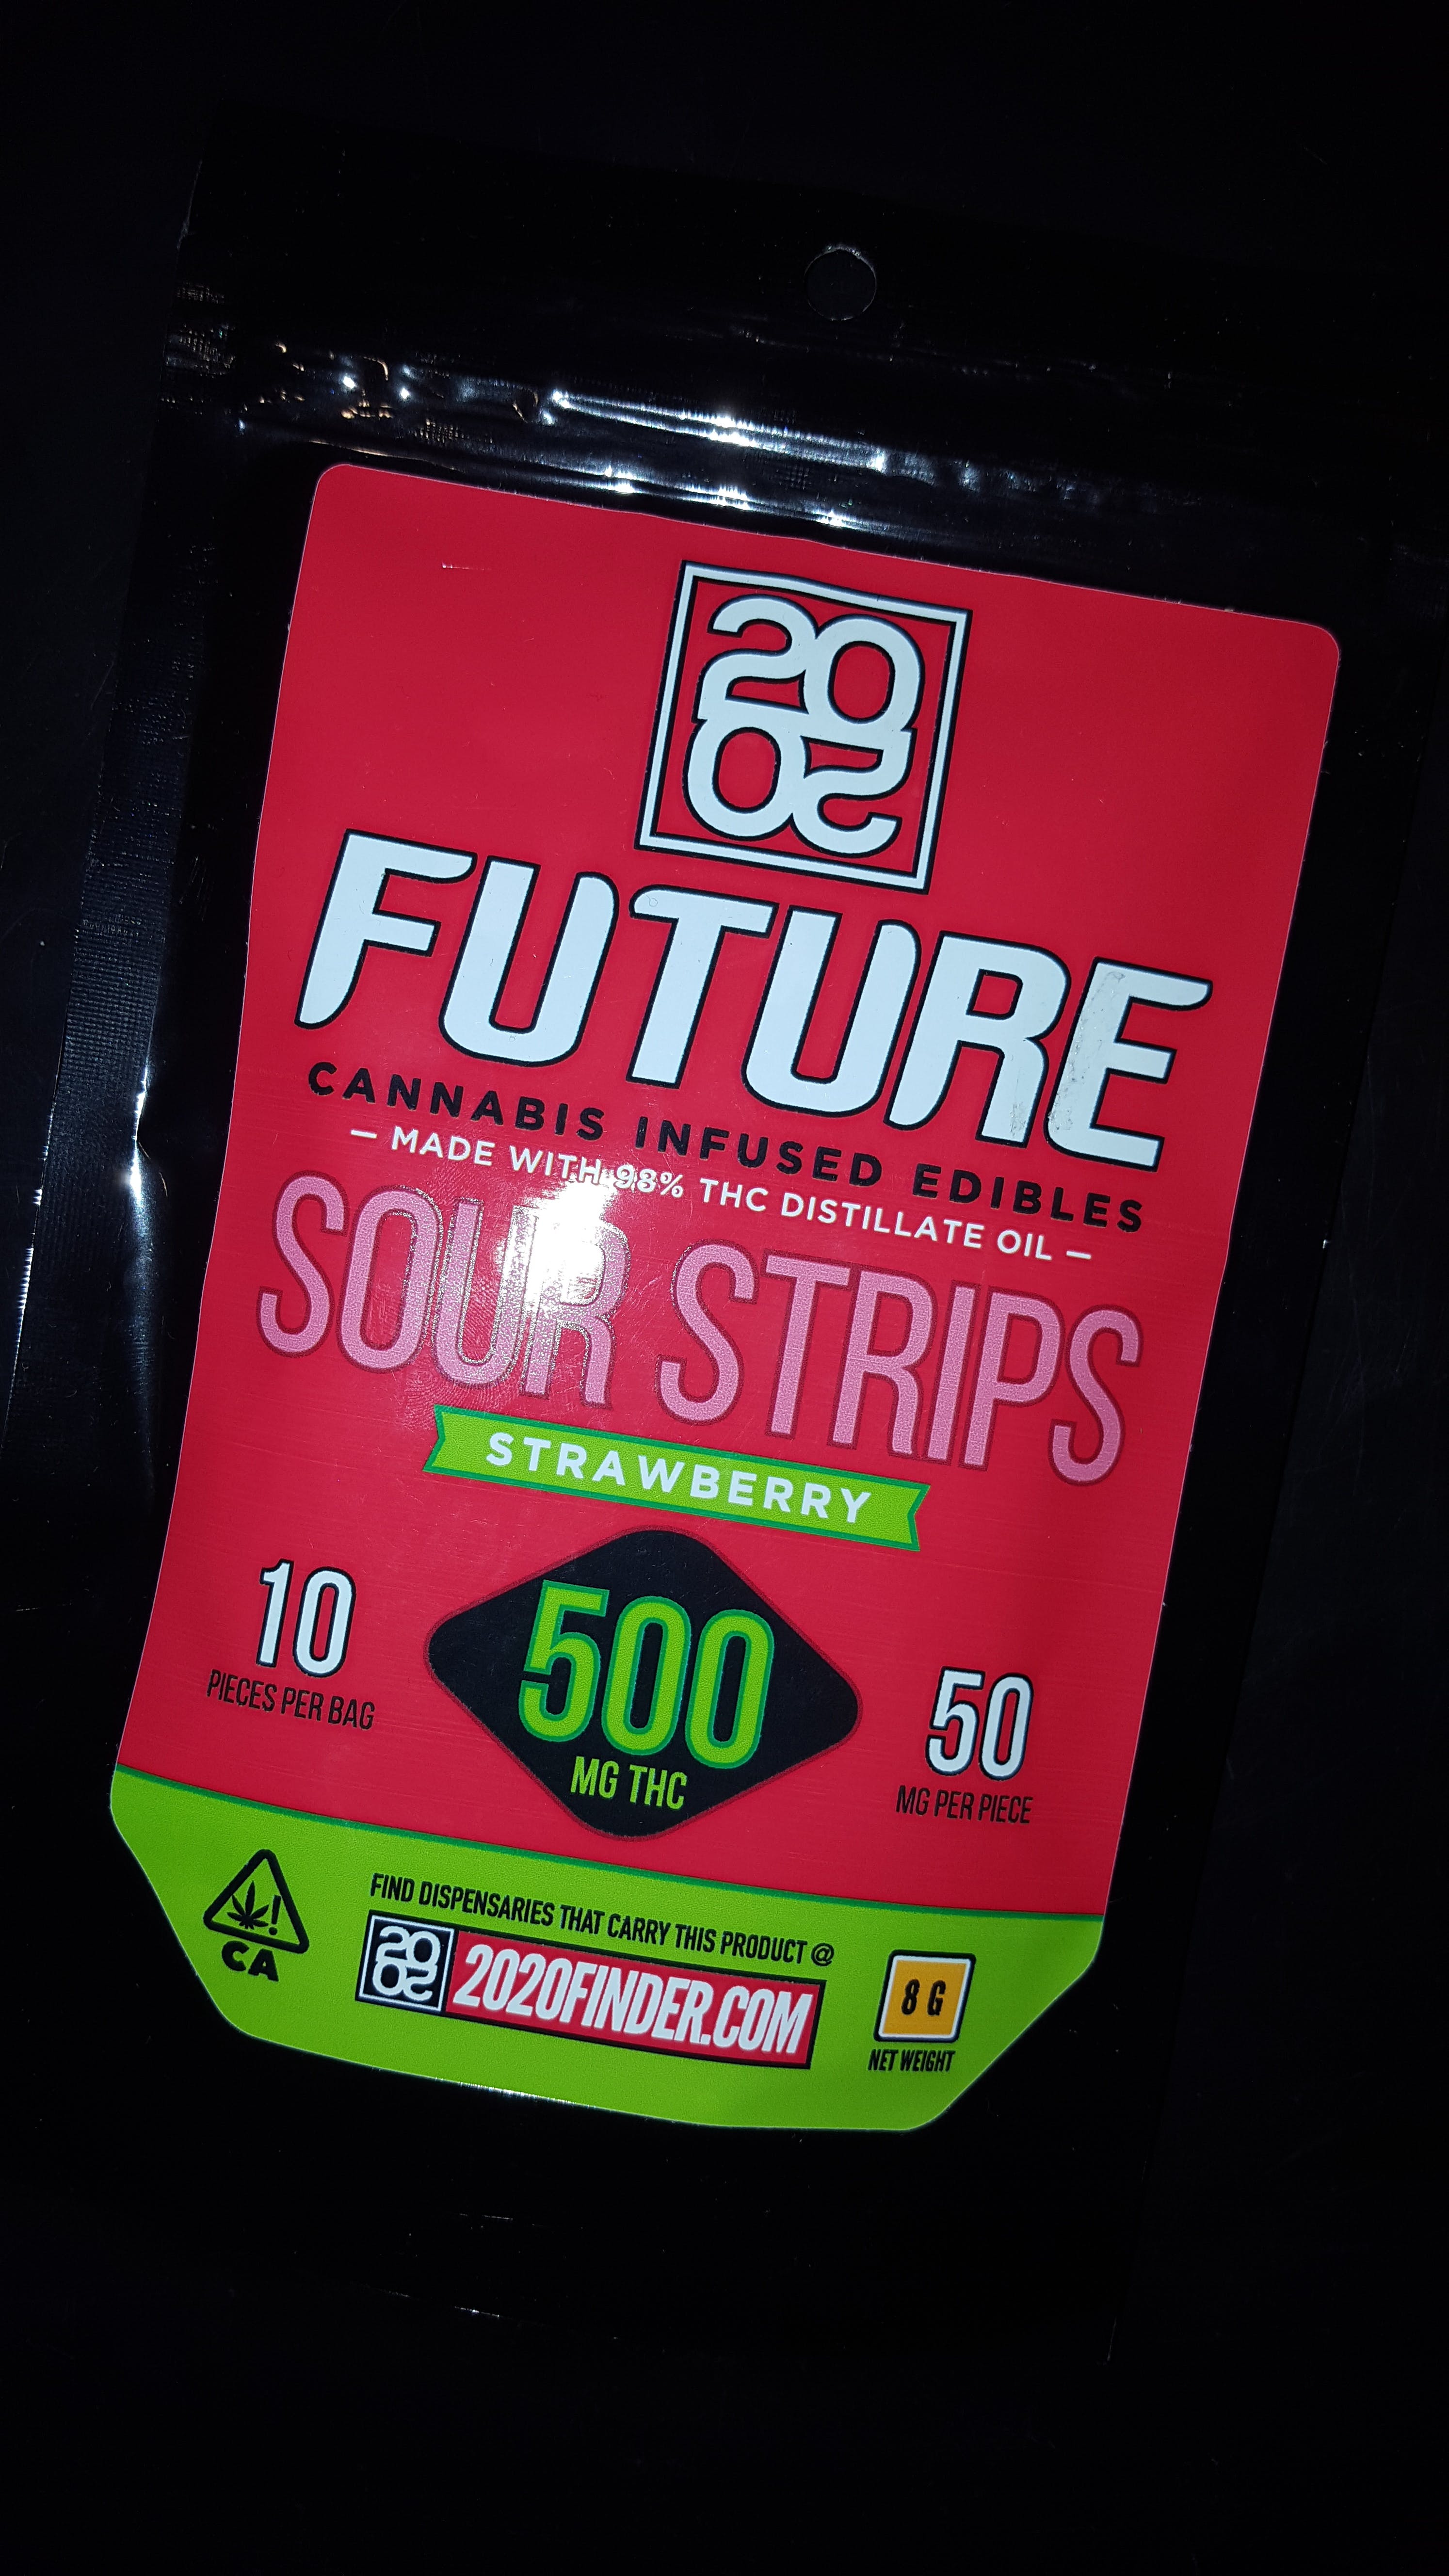 marijuana-dispensaries-8714-vermont-ave-2c-los-angeles-2c-ca-90044-los-angeles-2020-future-cannabis-infused-strawberry-sour-strips-500-mgs